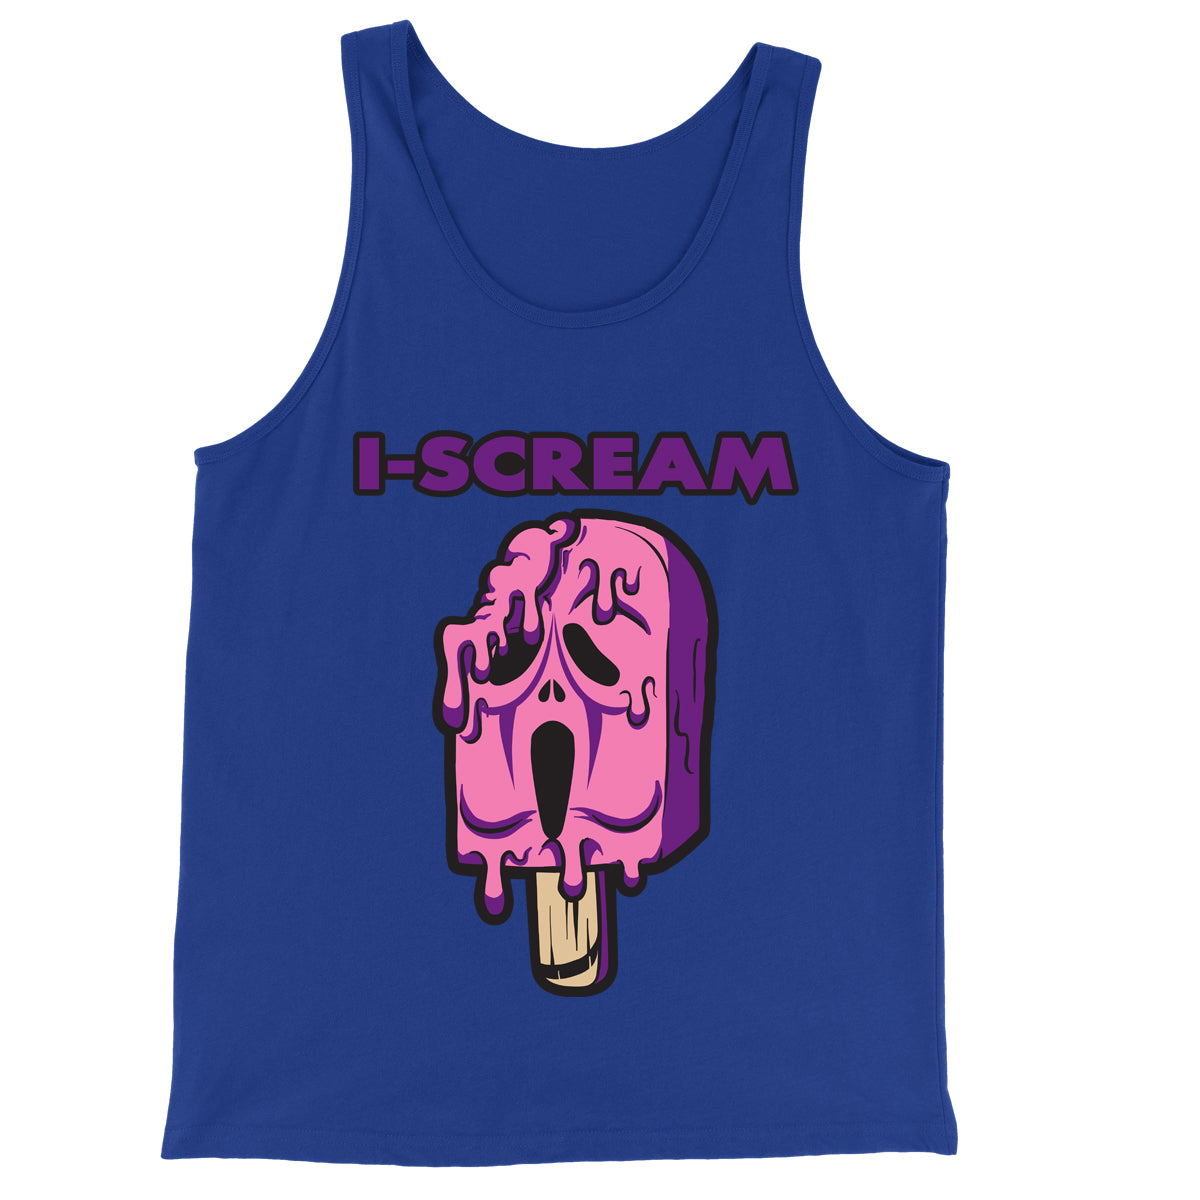 Movie The Food - I-Scream Tank Top - Limited Edition True Royal